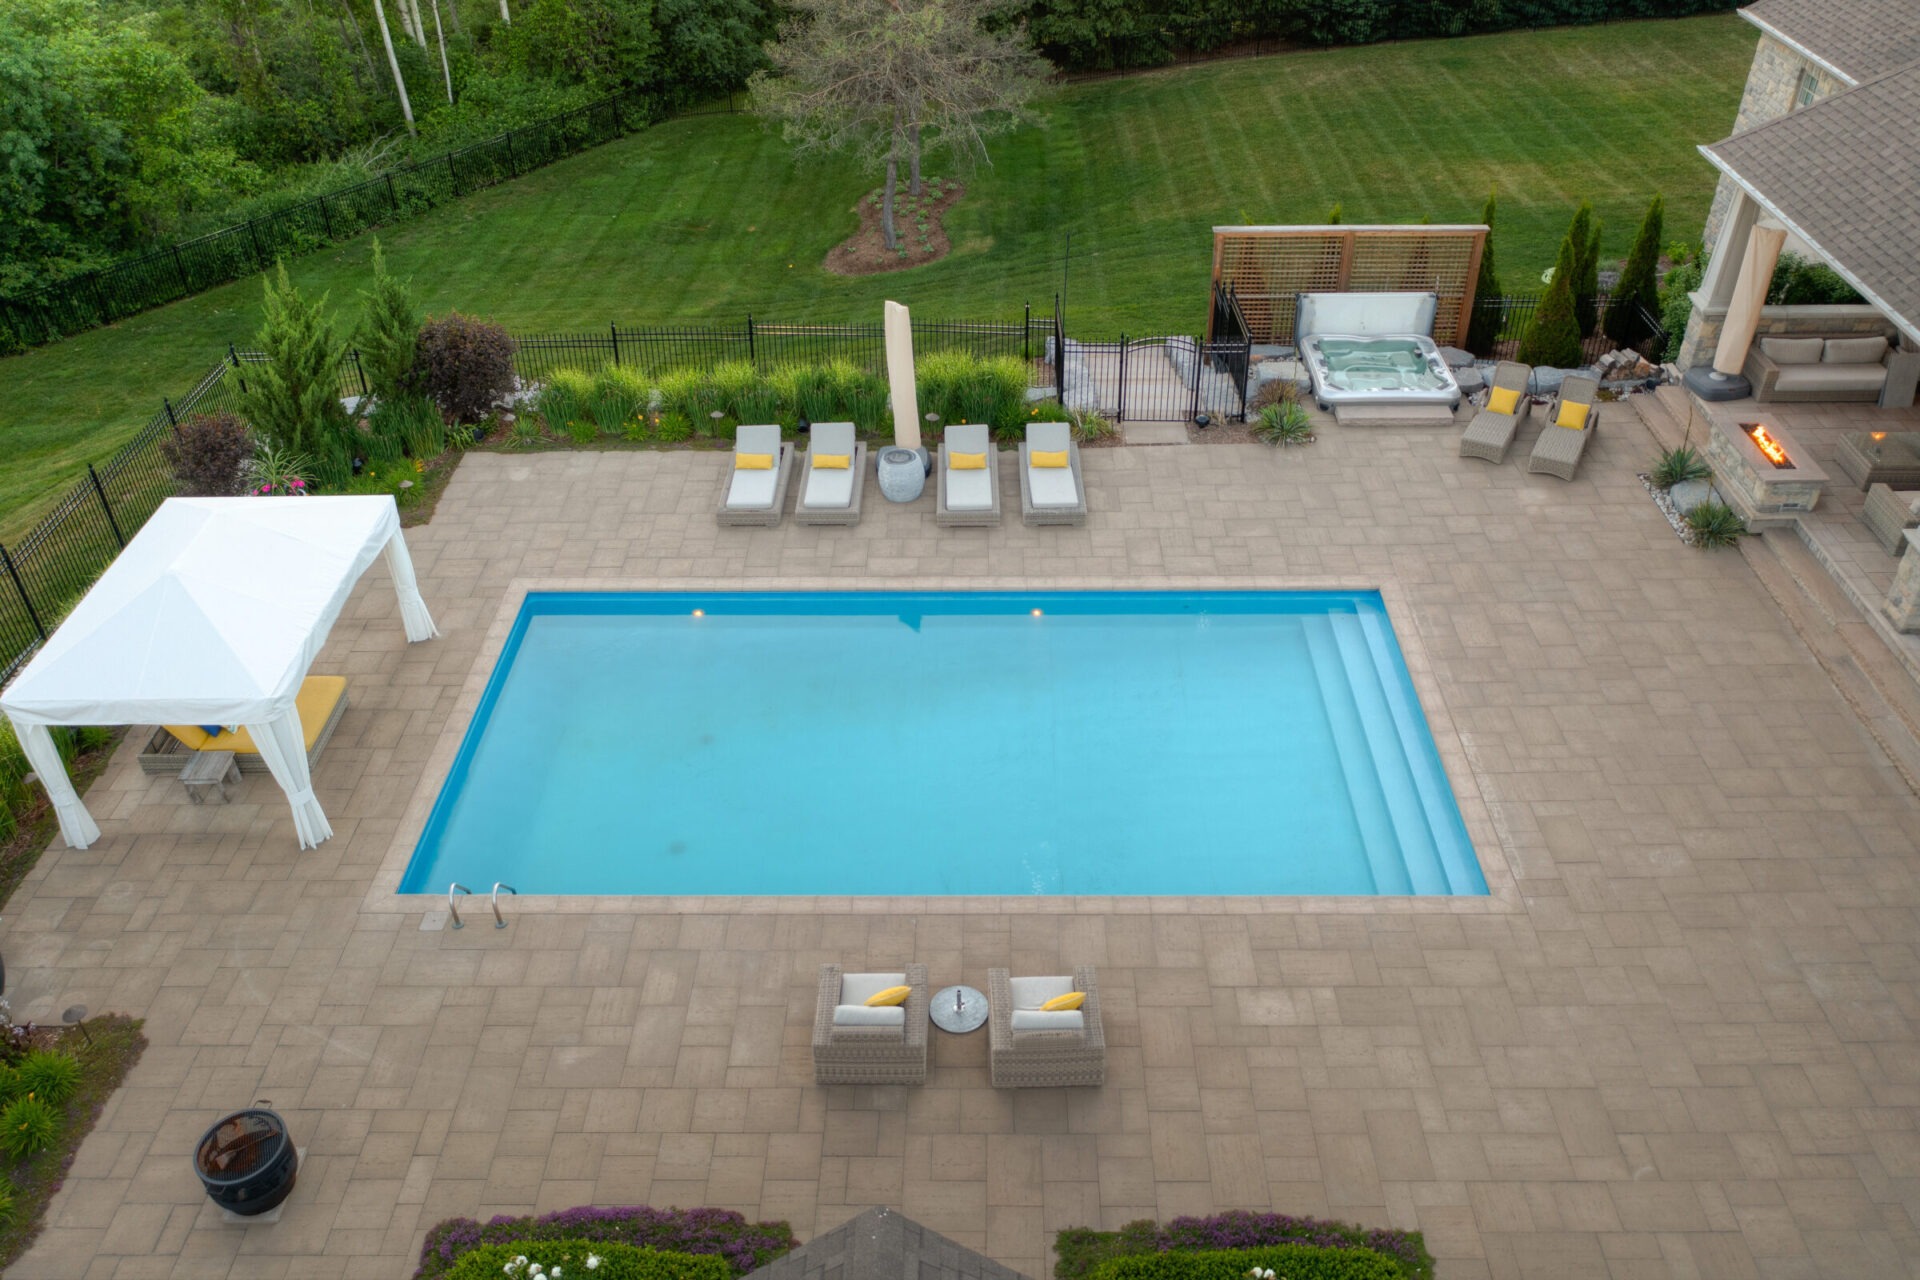 The image shows a residential backyard with a large swimming pool, lounge chairs, a hot tub, a pergola, and a neatly trimmed lawn.